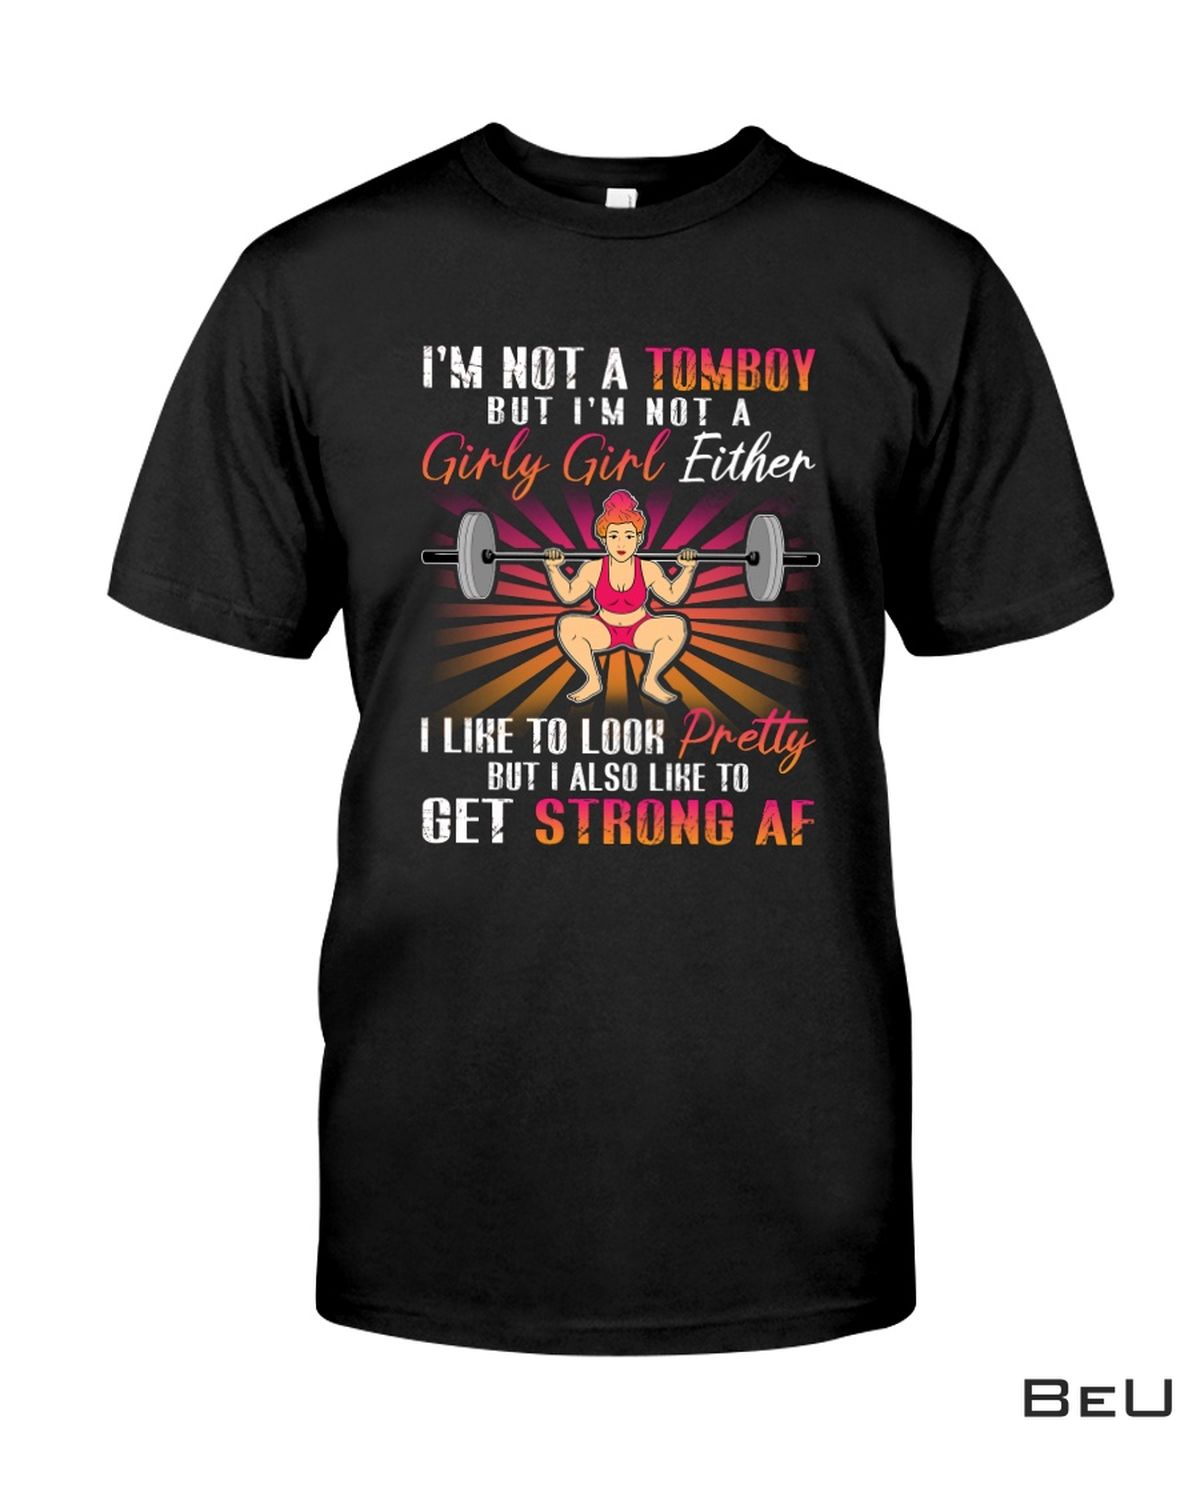 Weight Lifting I’m Not A Tomboy But I’m Not A Girly Girl Either Shirt